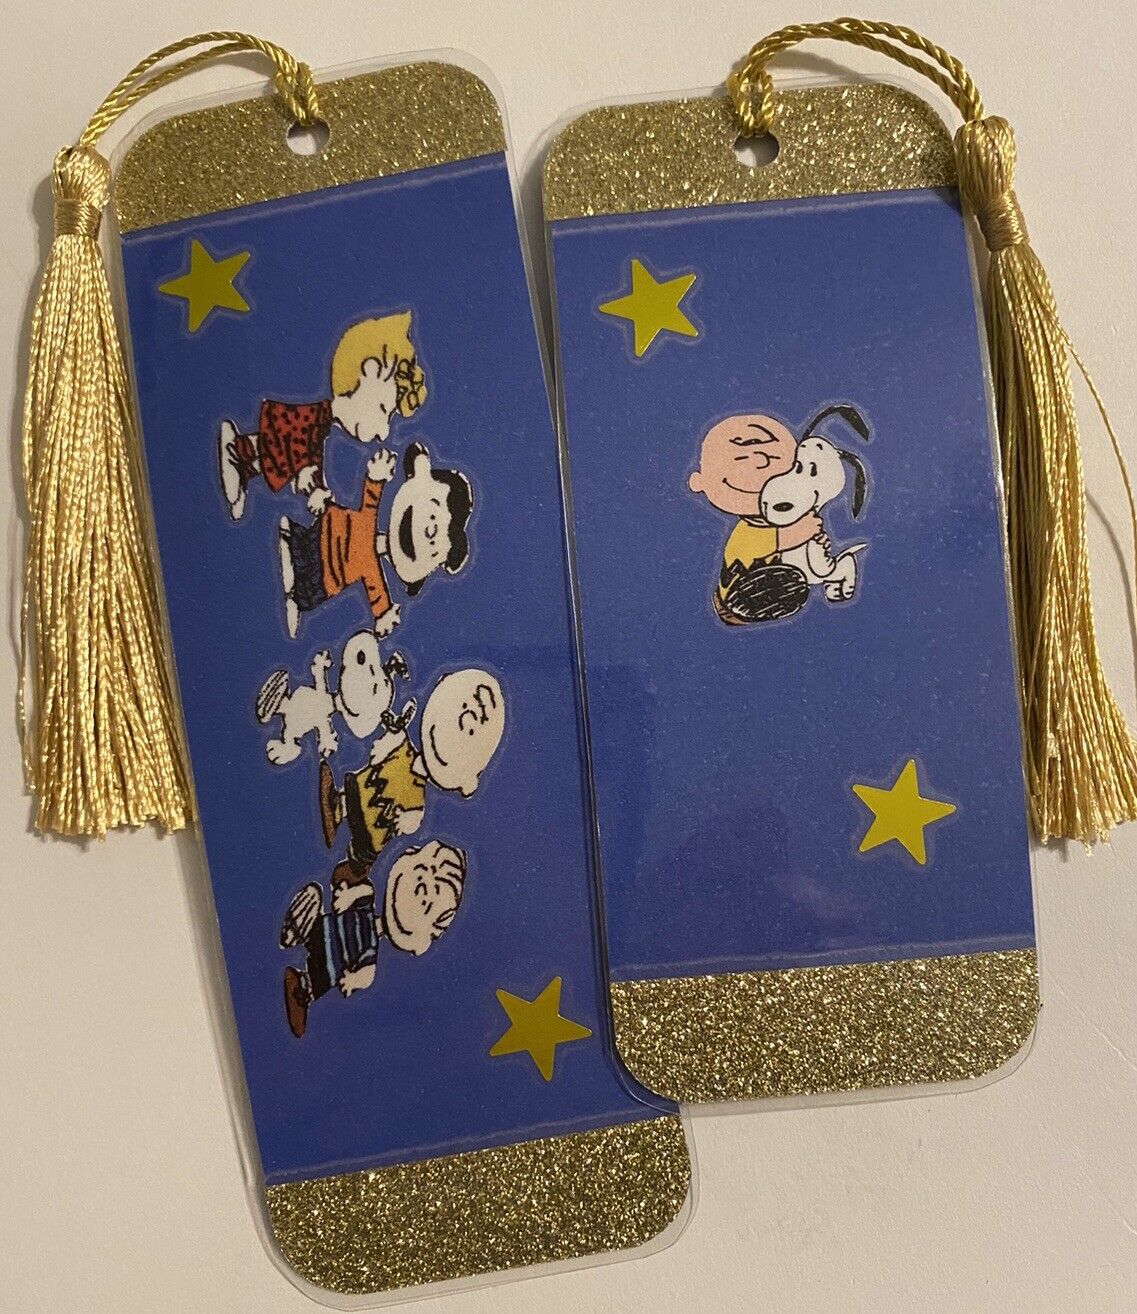 Set of 2 - Snoopy Peanuts Bookmarks with Tassel - Laminated with Glitter Borders